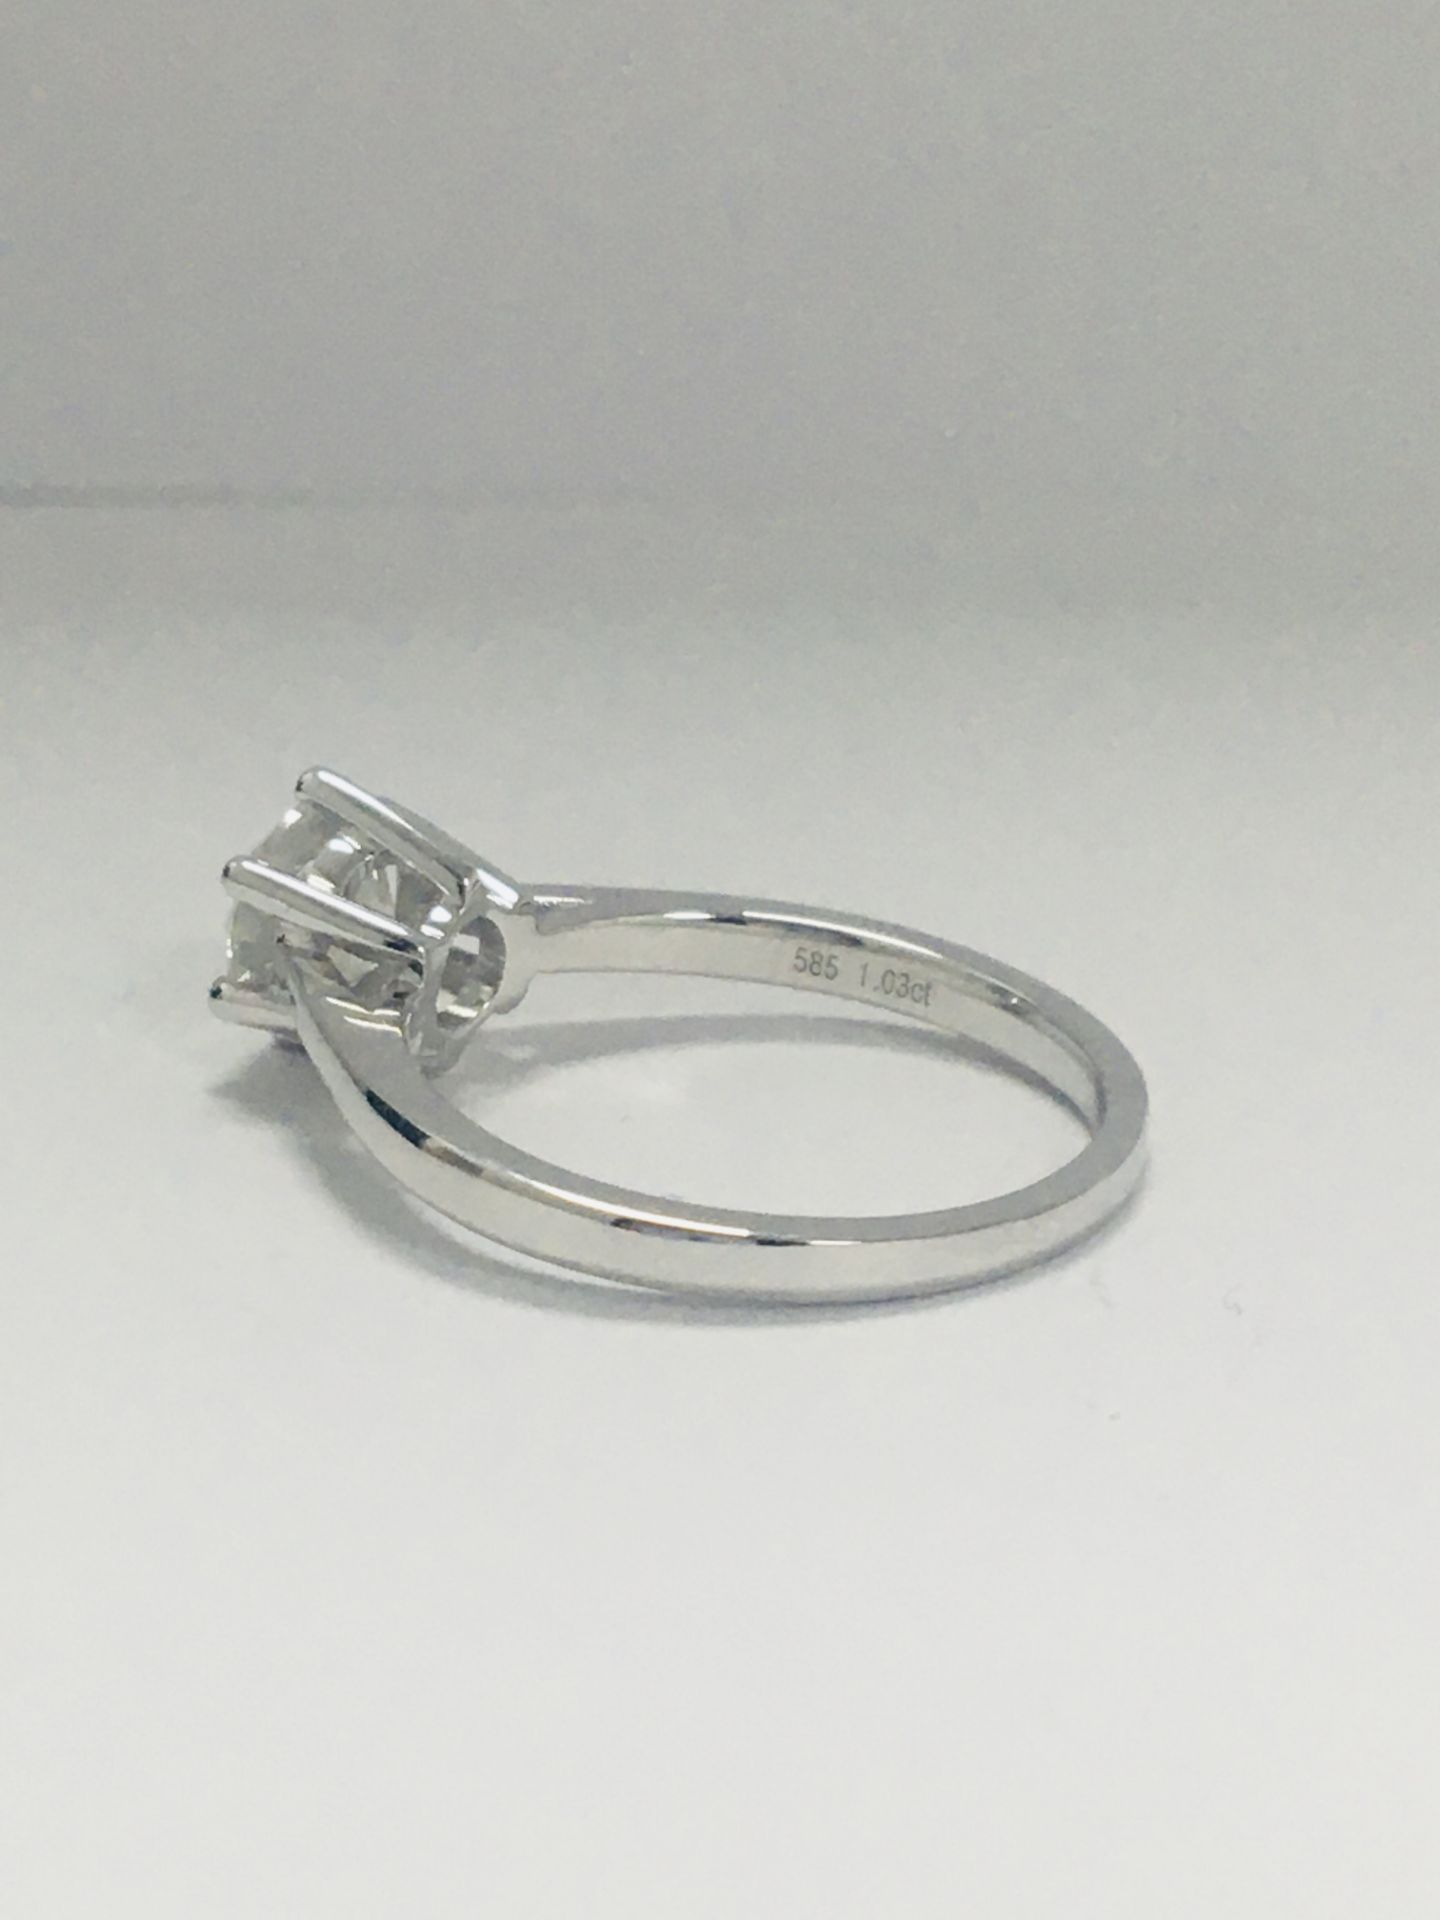 14Ct White Gold Diamond Solitaire Ring - Image 4 of 10